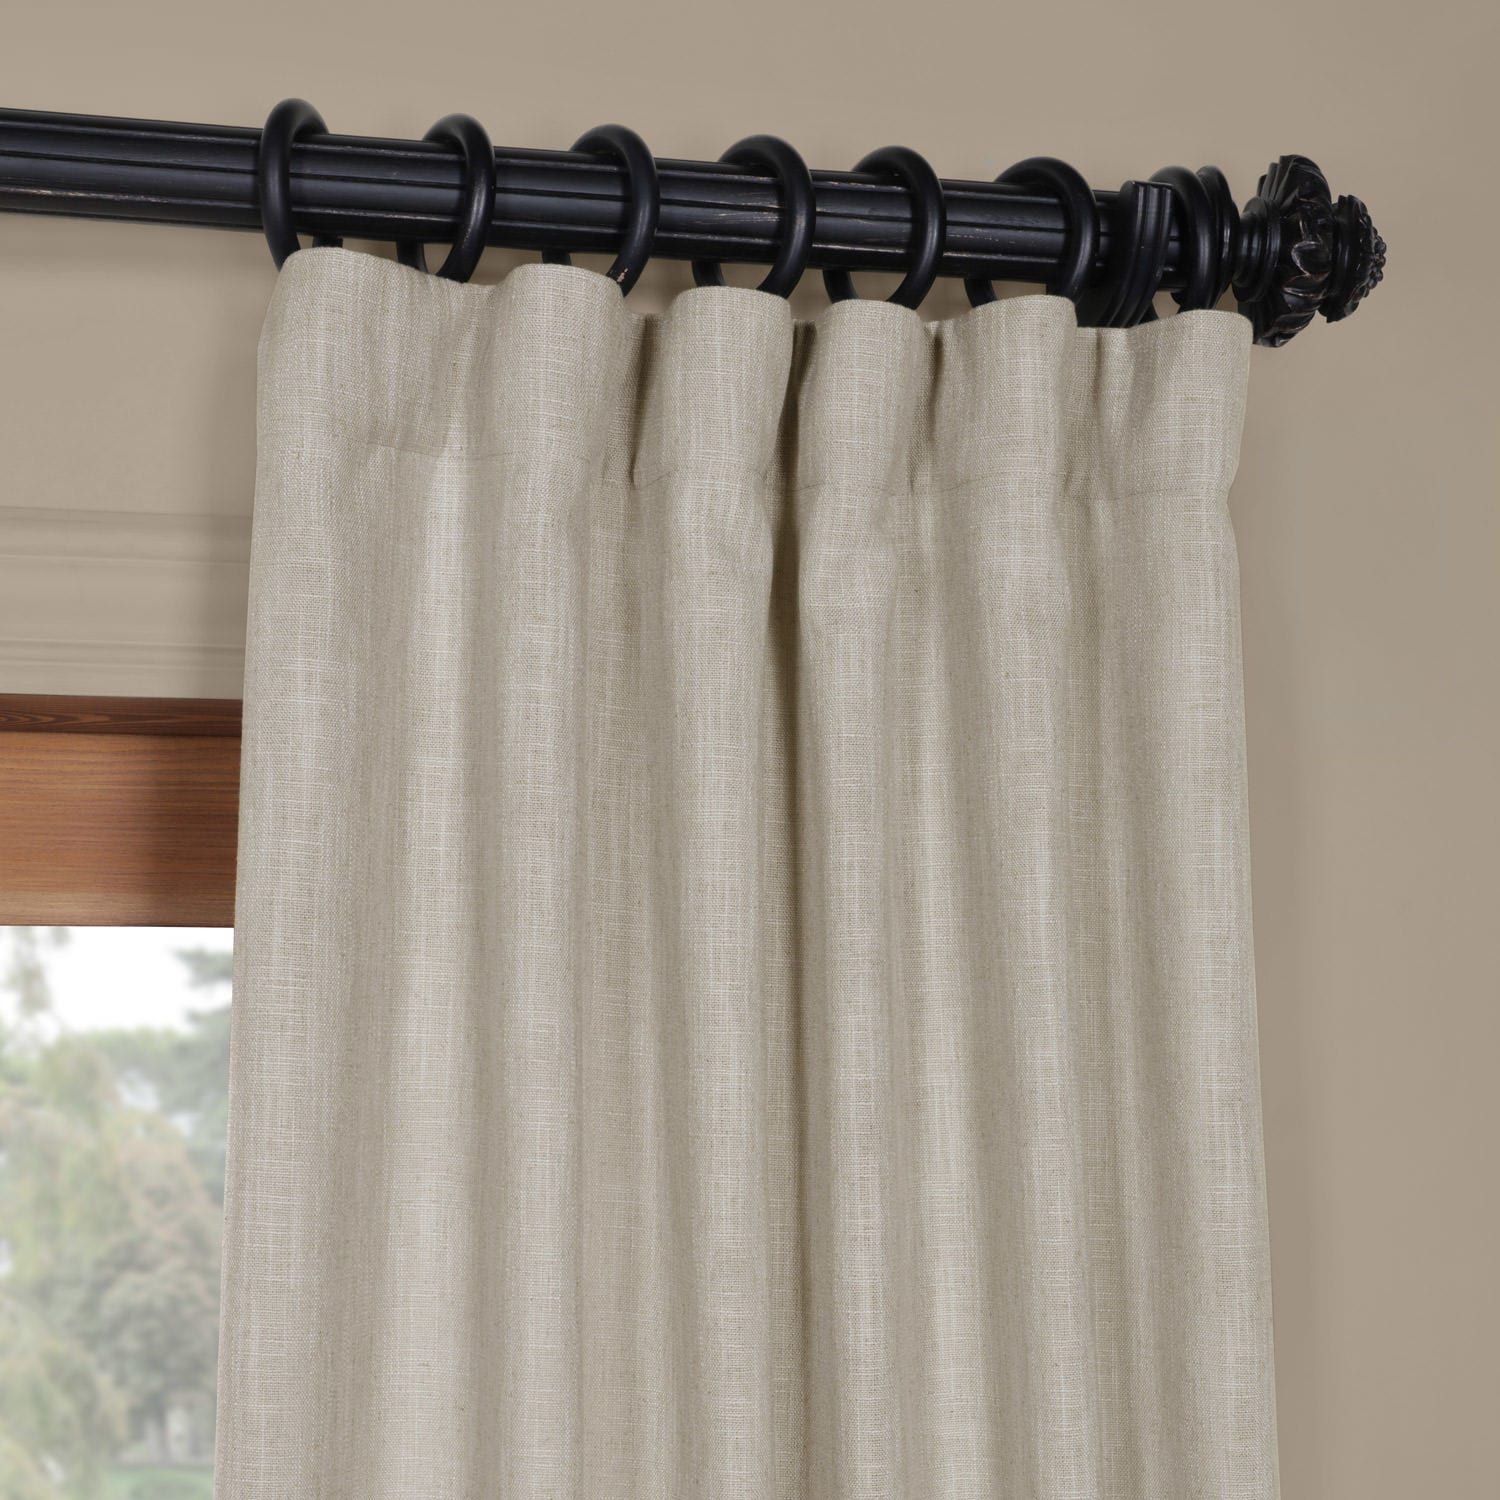 Half Price Drapes Solid Heavy Faux Linen Rod Pocket Single Curtain Panel Throughout Heavy Faux Linen Single Curtain Panels (View 3 of 20)